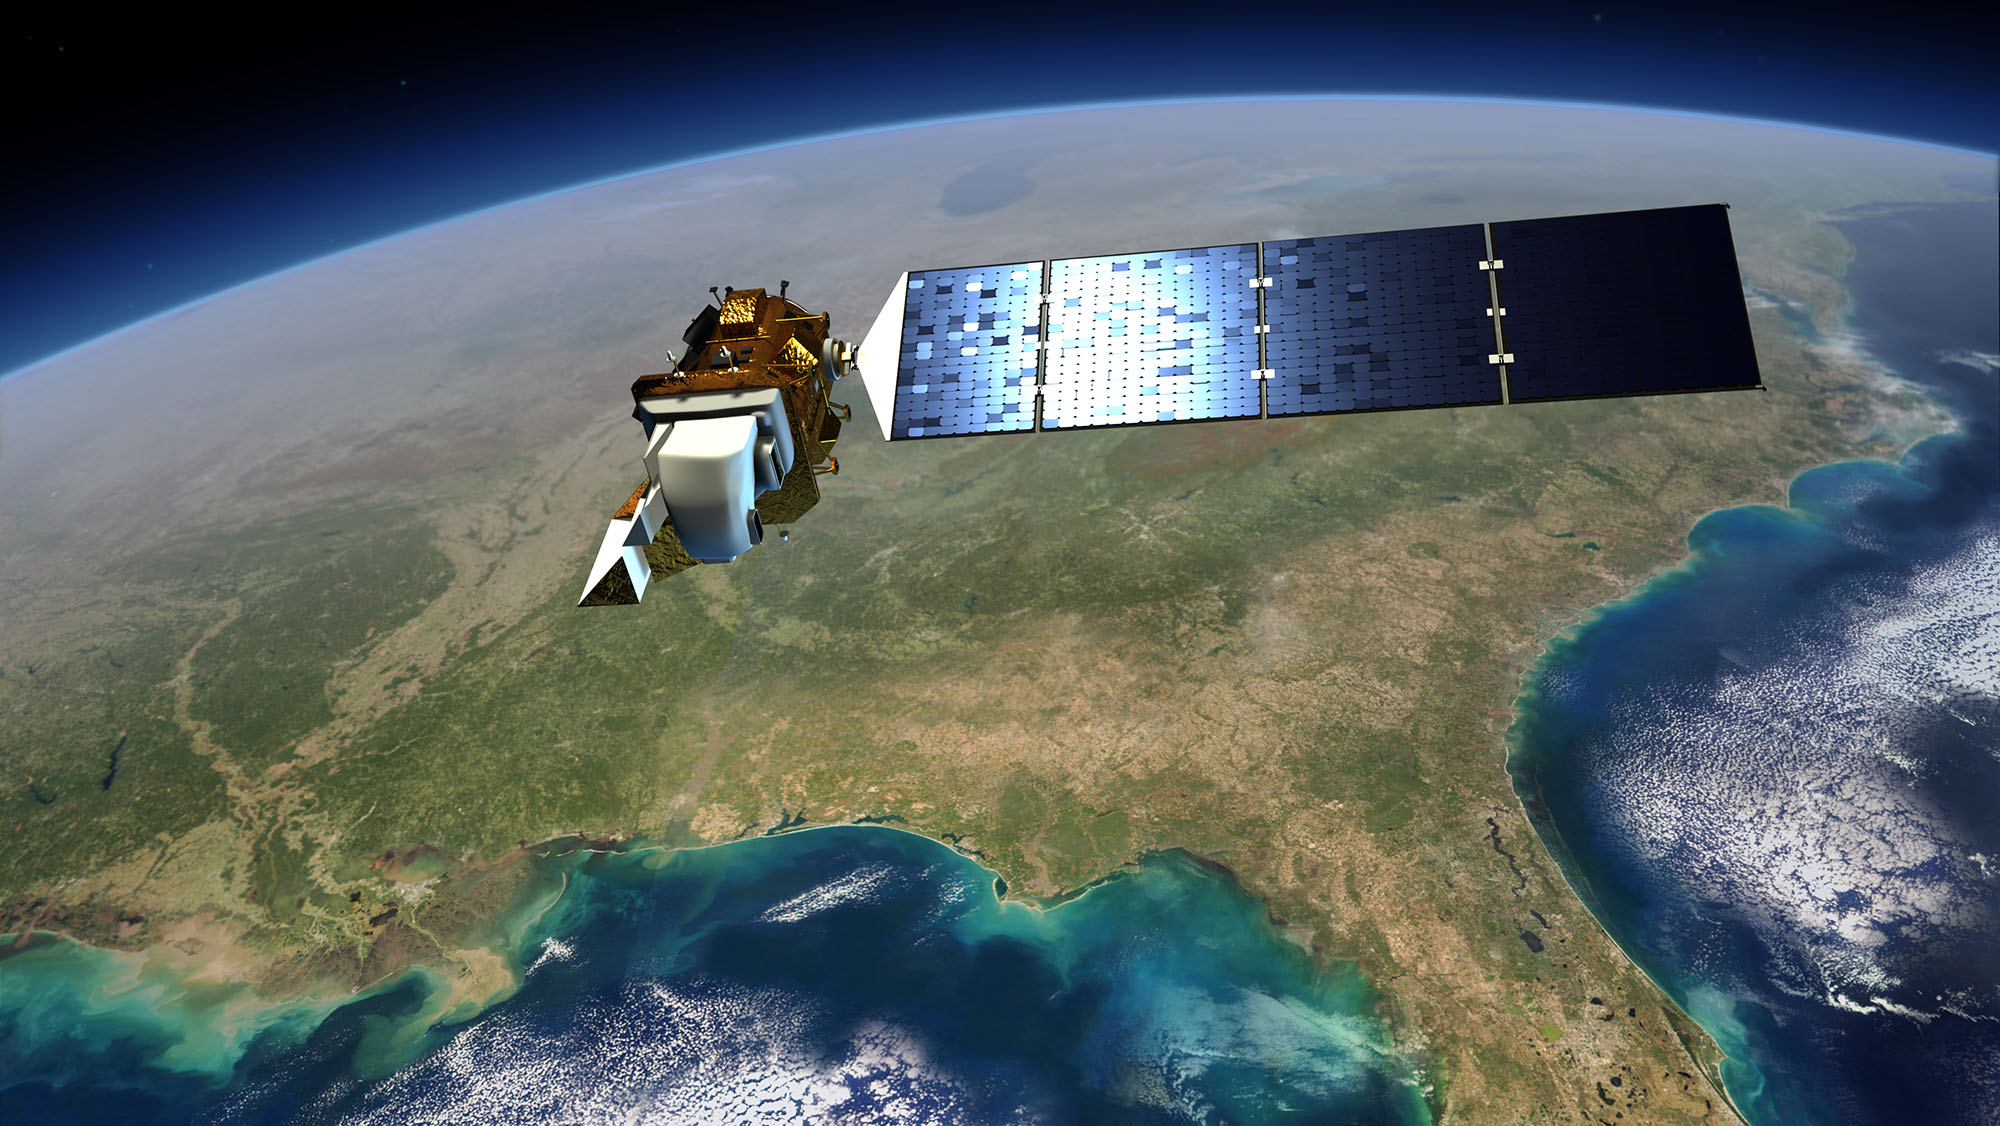 An artist's conception of the Landsat Data Continuity Mission (LDCM), the eigth satellite in the long-running Landsat program, flying over the US Gulf Coast.